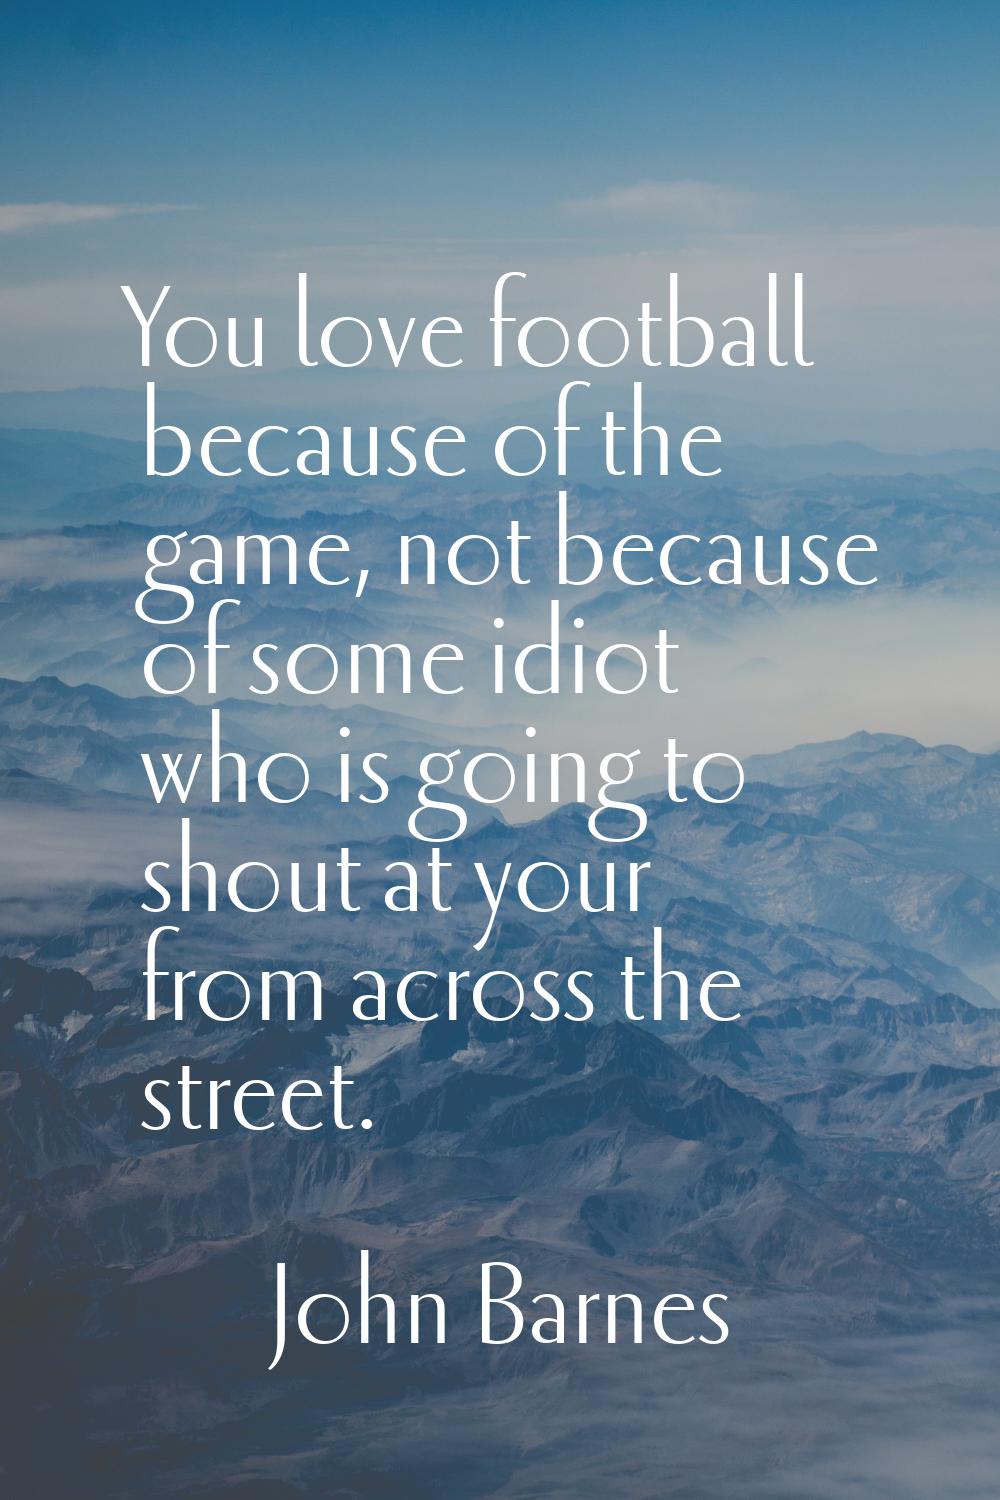 You love football because of the game, not because of some idiot who is going to shout at your from